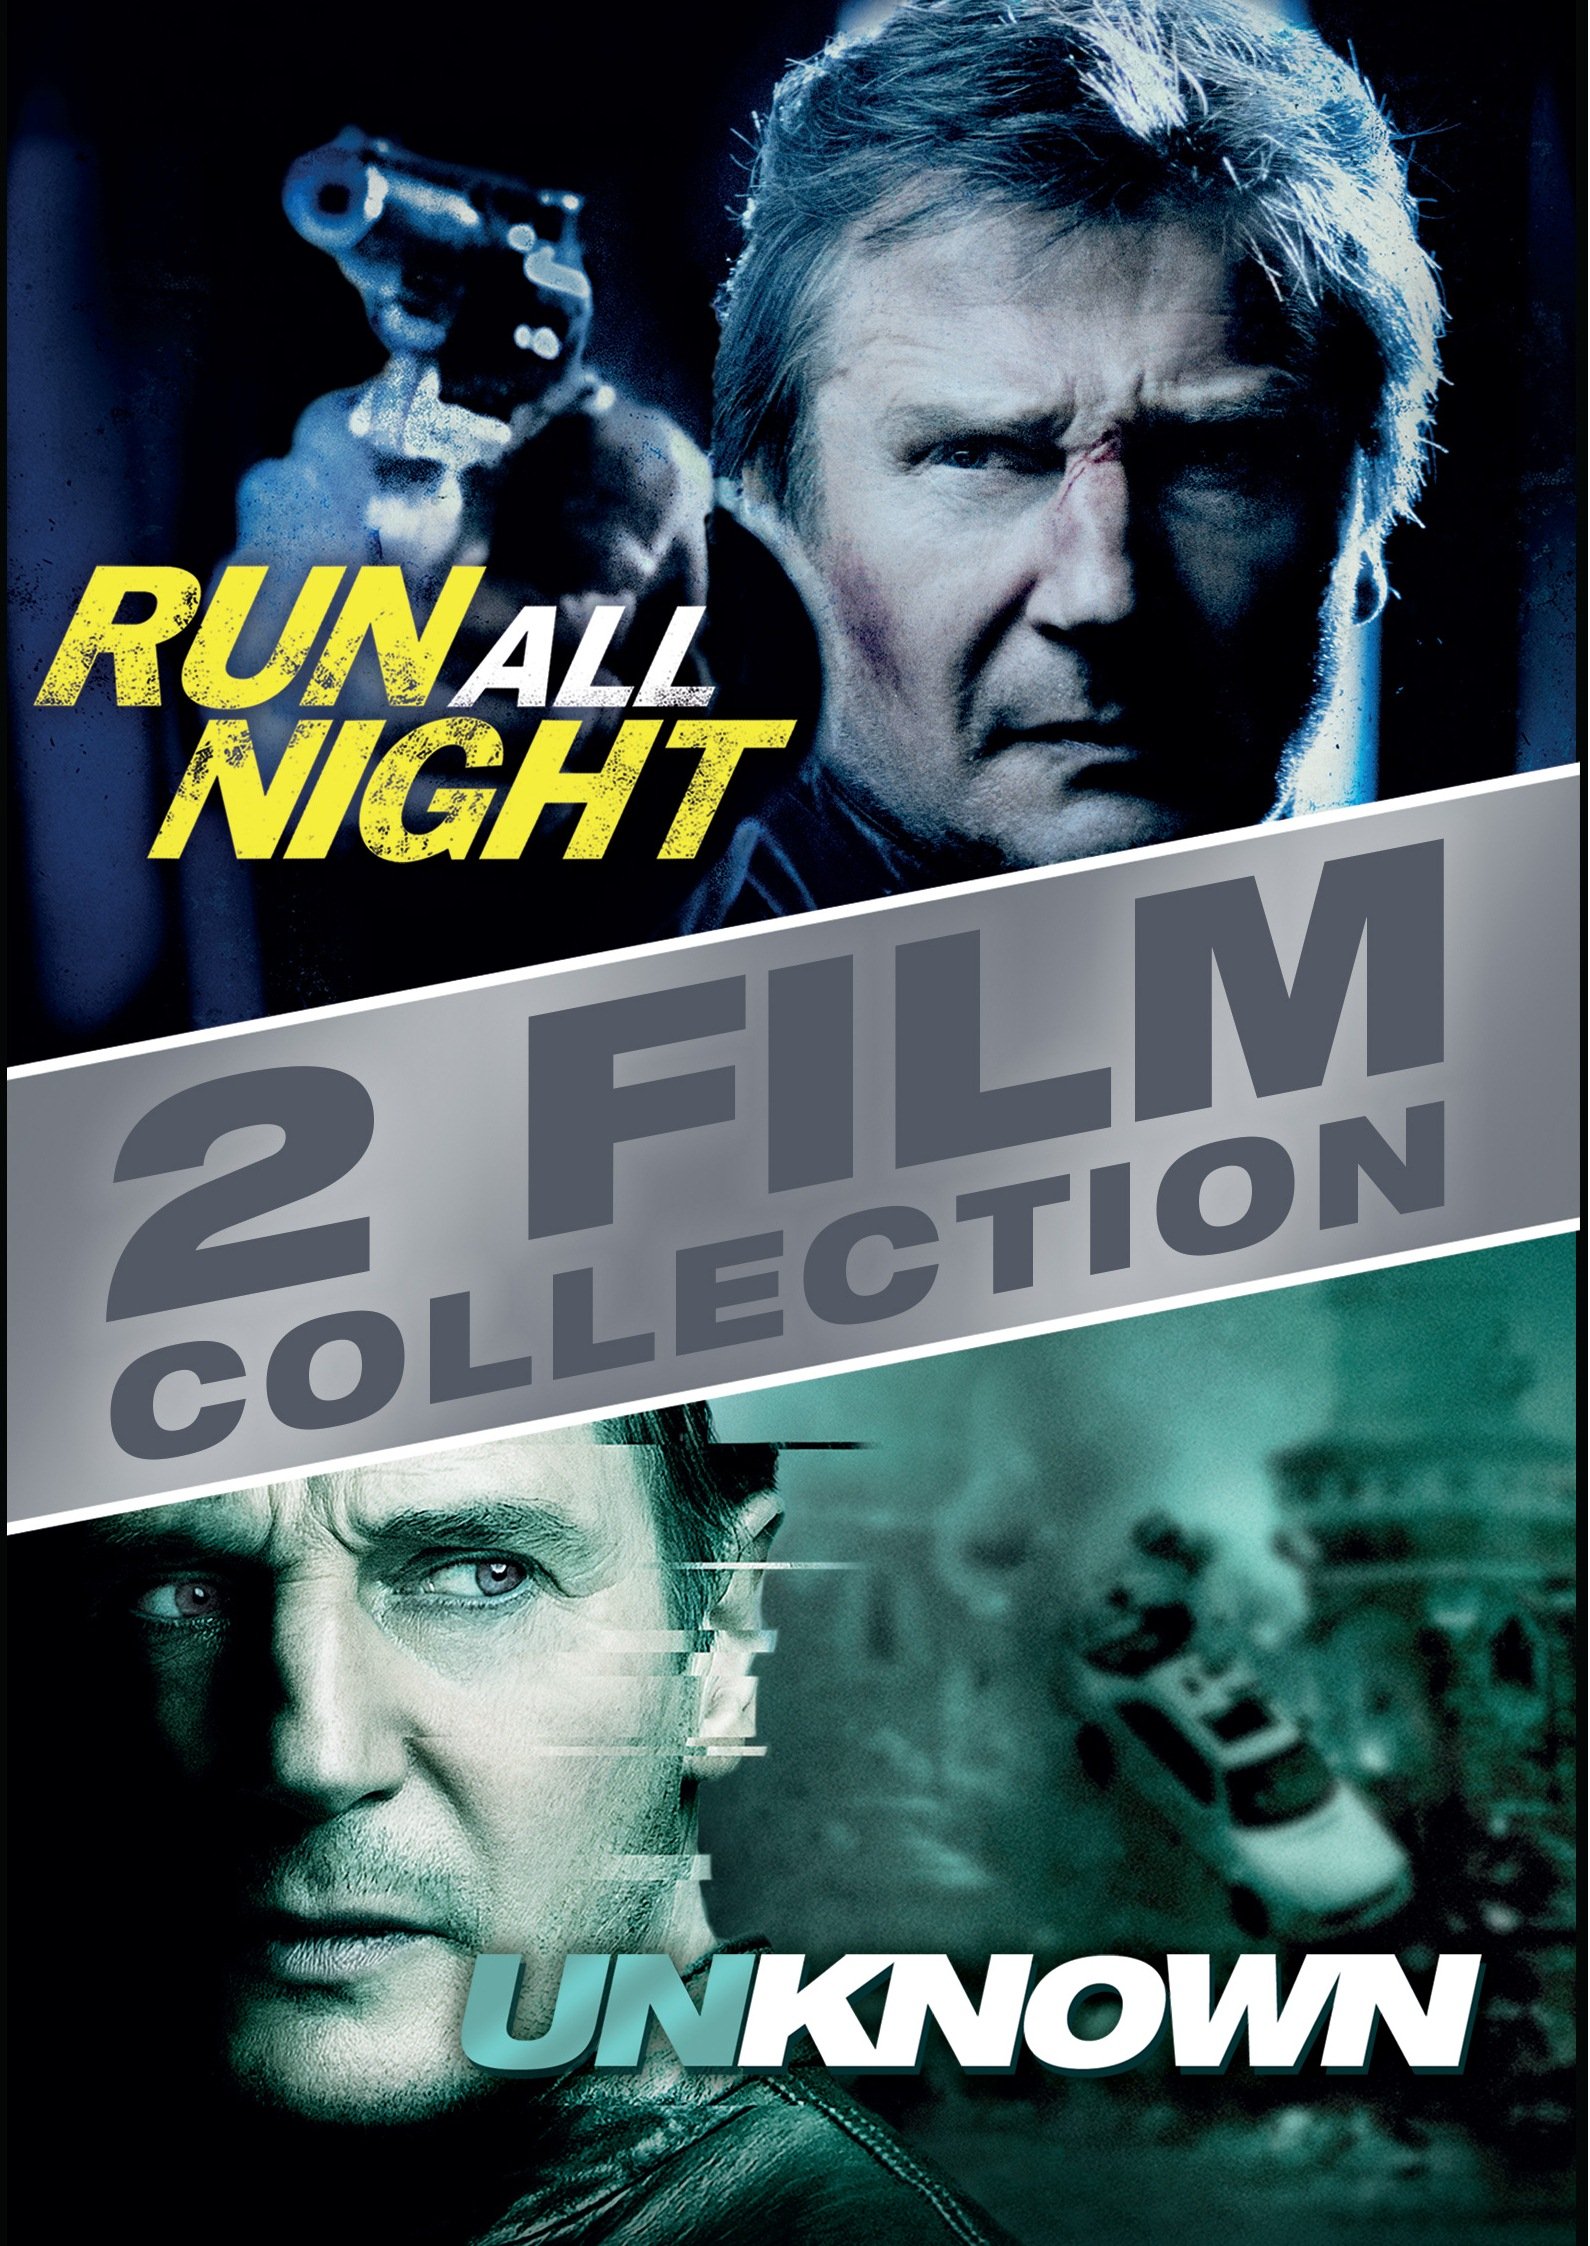 liam-neeson-collection-unknown-run-all-night-movie-purchase-or-wat